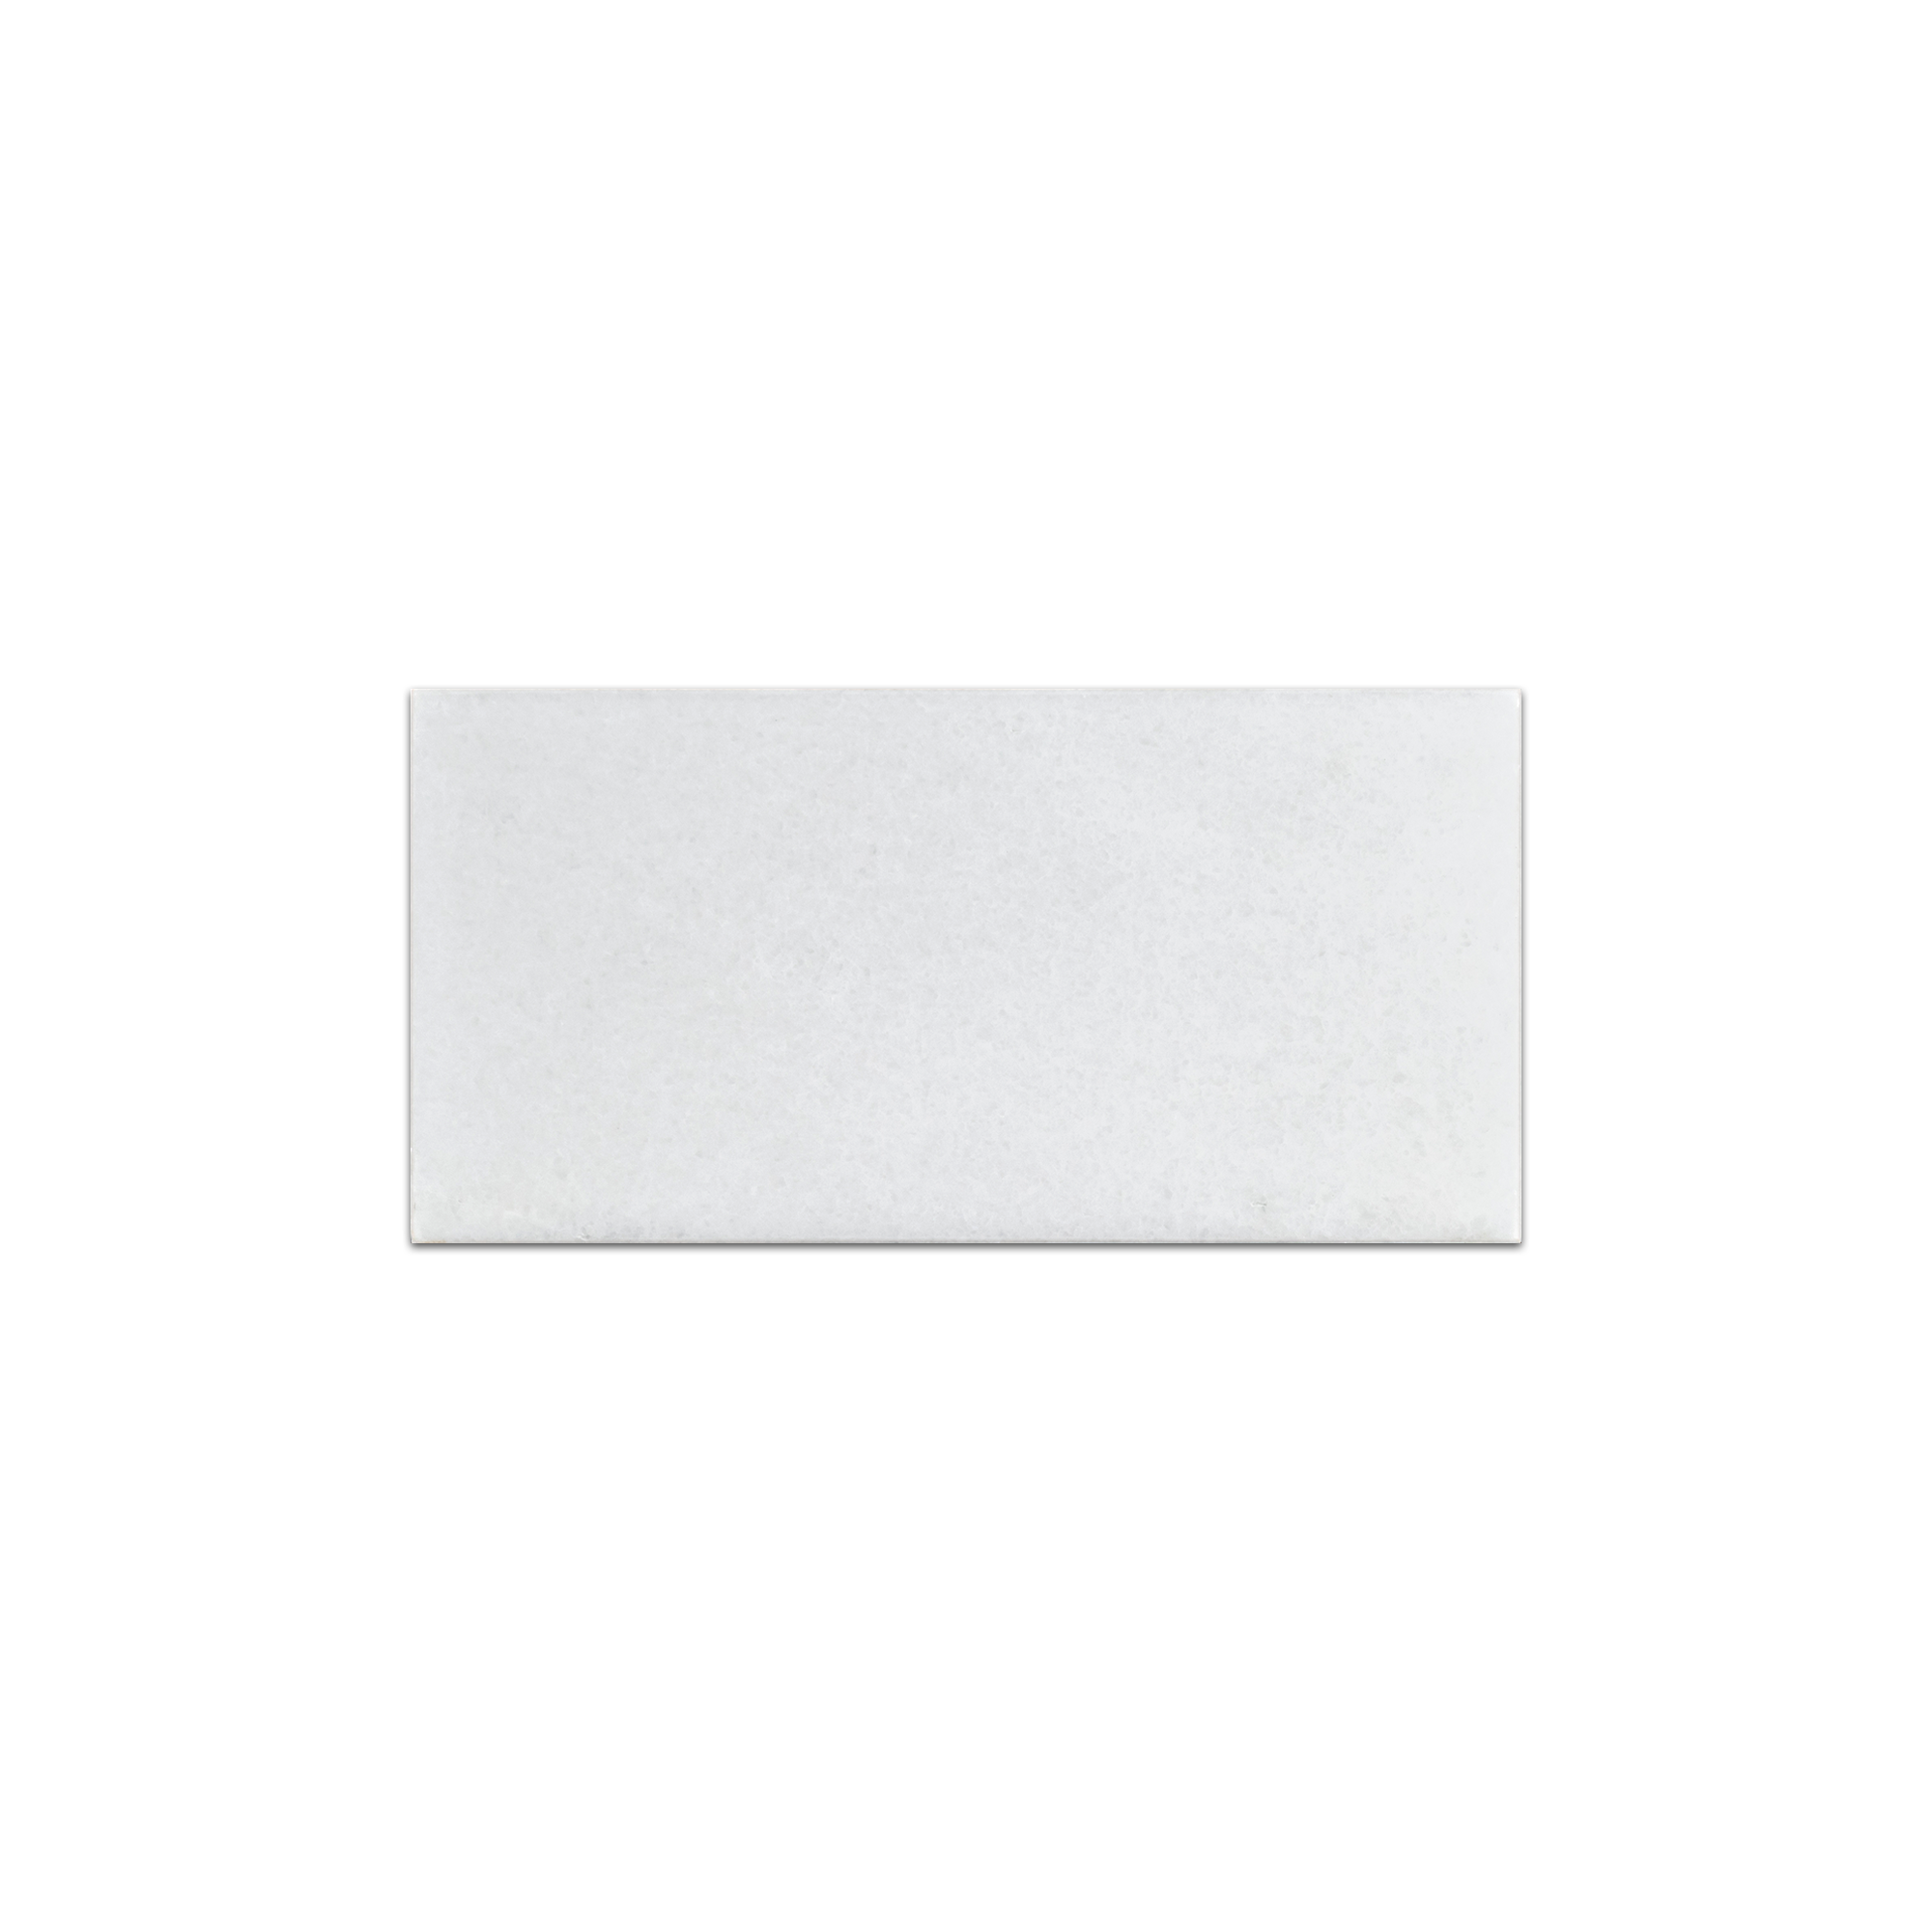 Elon White Thassos Marble Rectangle Field Tile 3x6x0.375 Polished - Surface Group International